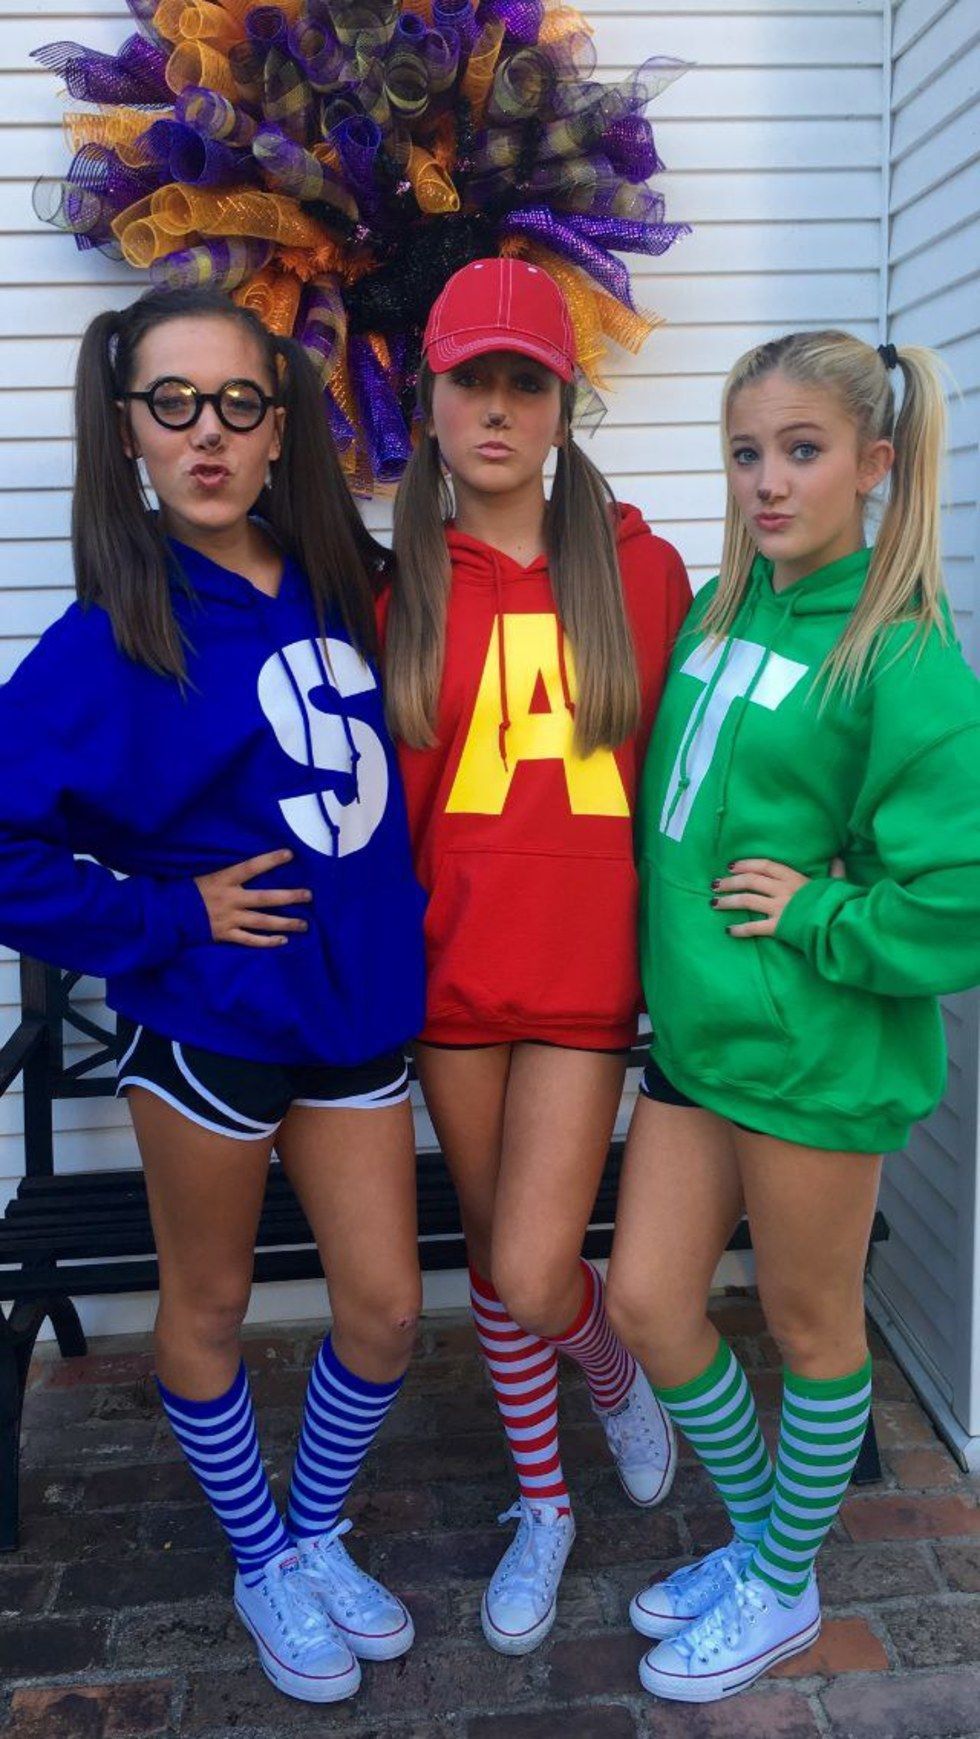 31 Greatest DIY Halloween Costumes For College Students - 31 Greatest DIY Halloween Costumes For College Students -   22 cute diy Halloween Costumes ideas